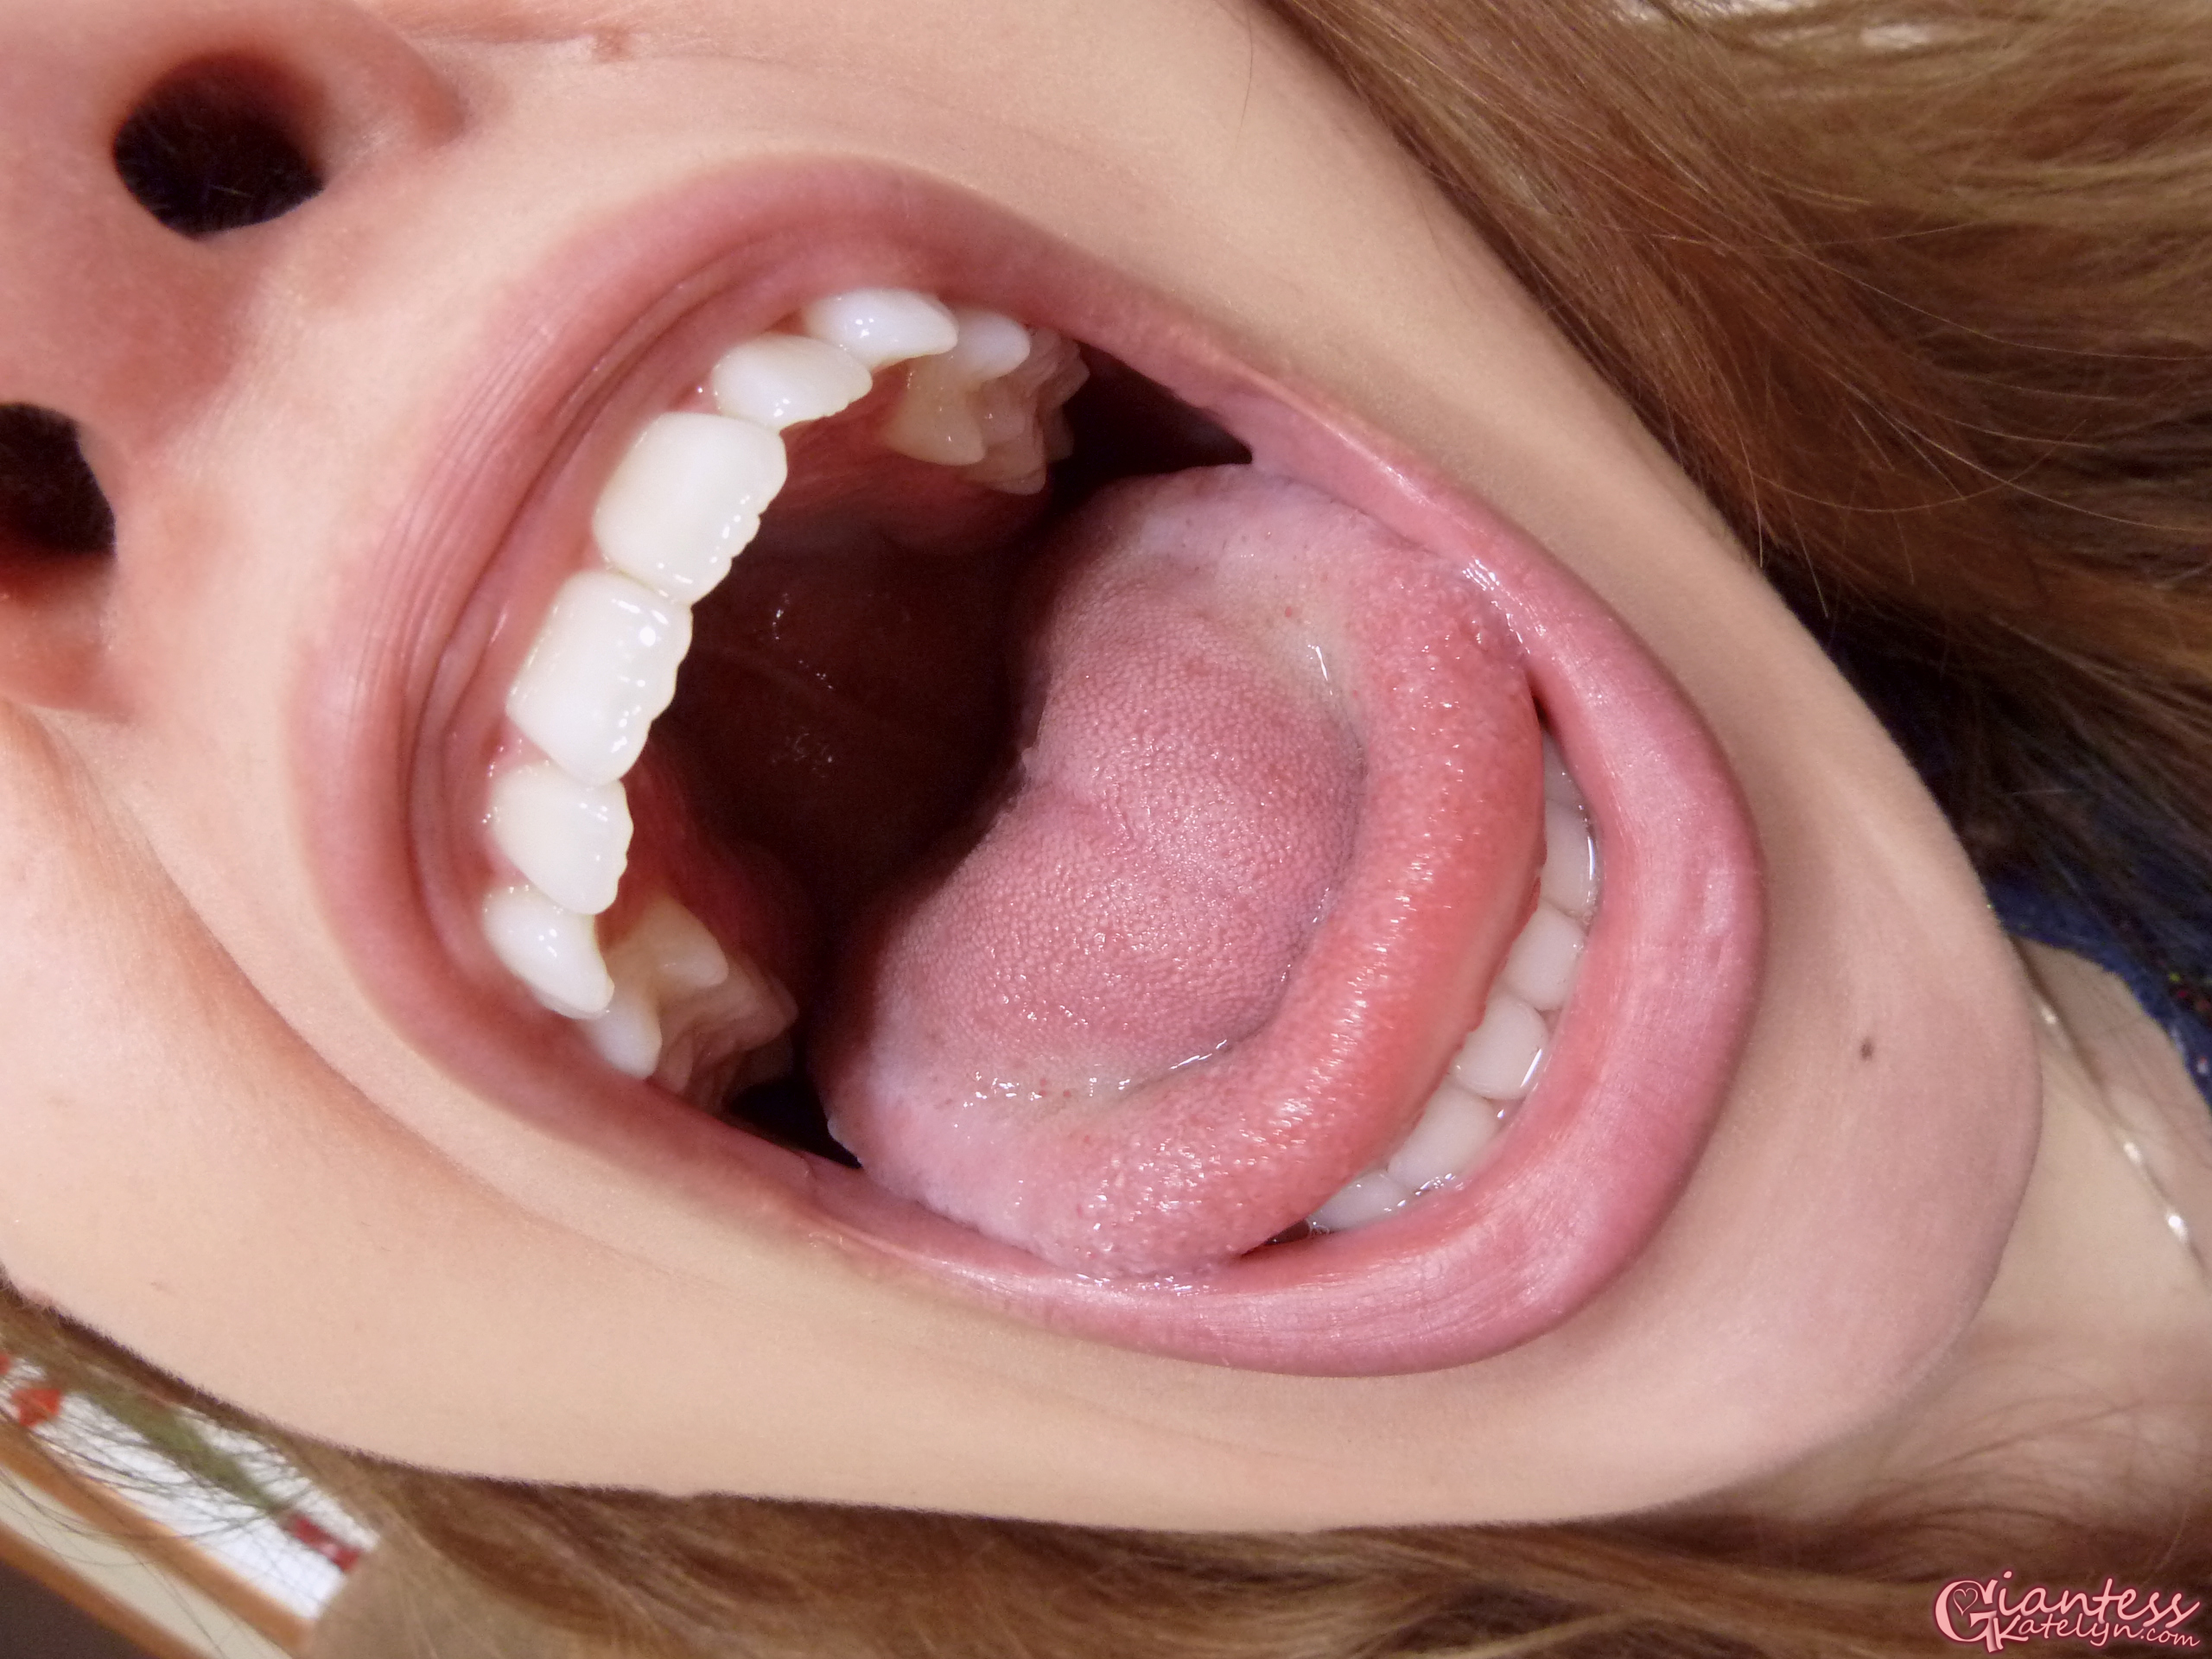 Katelyn Brooks showing the inside of her mouth.